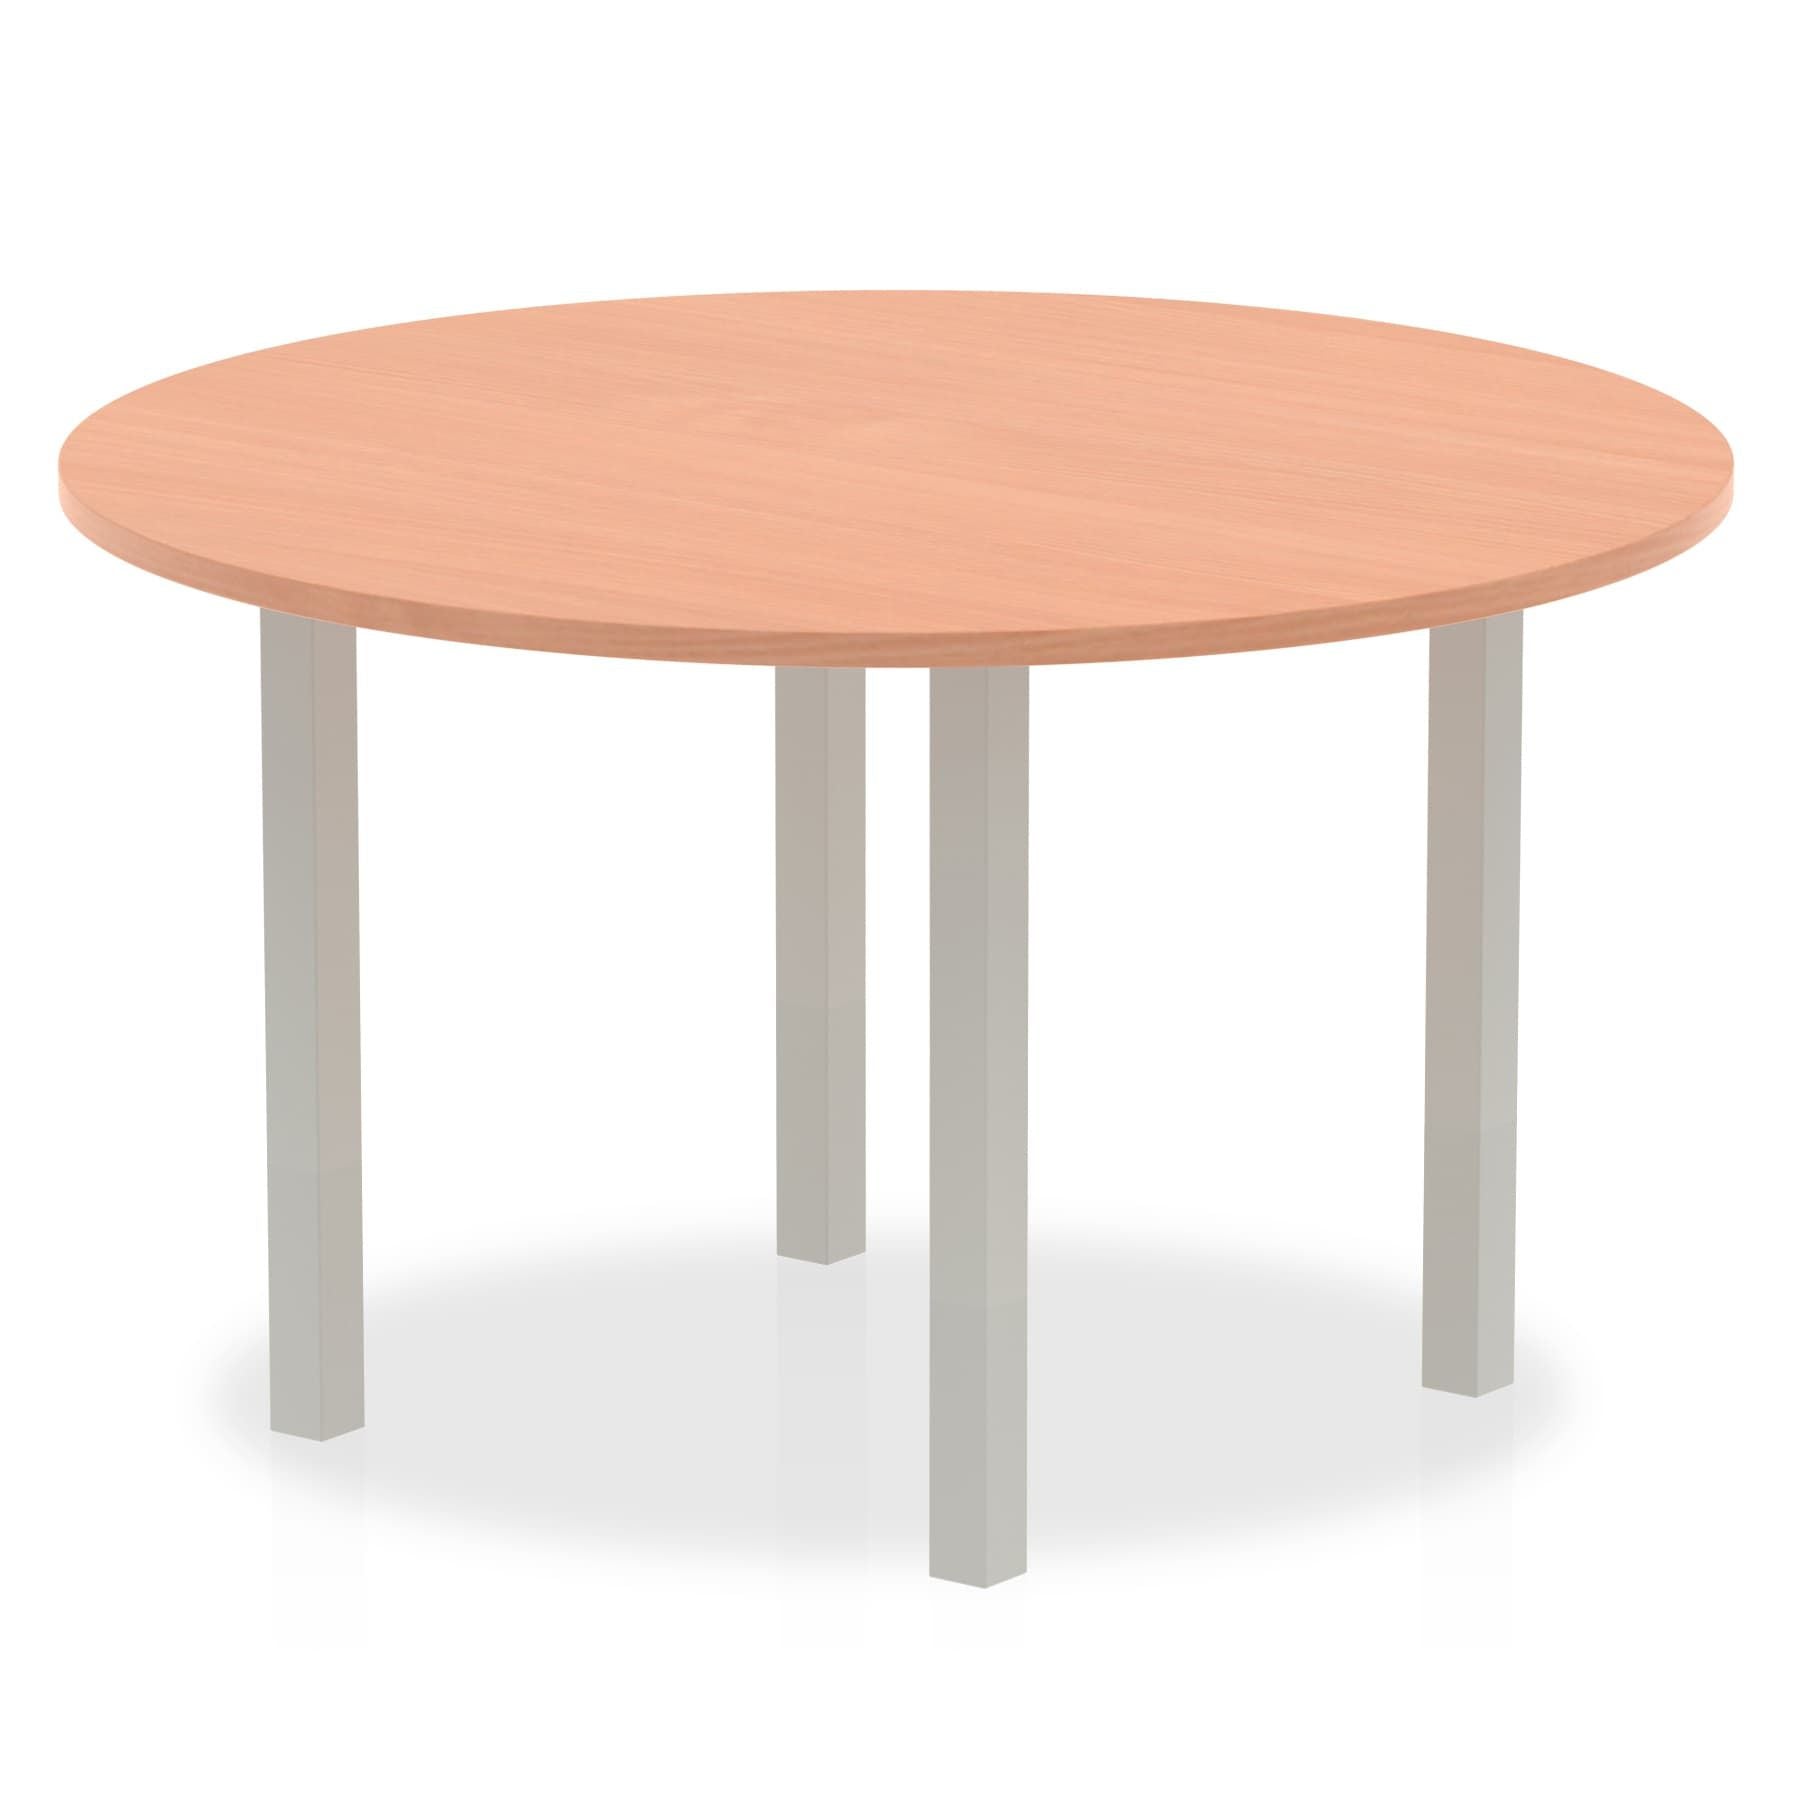 Impulse Round Table with Post Leg - 1000x1000 or 1200x1200 MFC Top, 5-Year Guarantee, Self-Assembly, Multiple Frame Colors